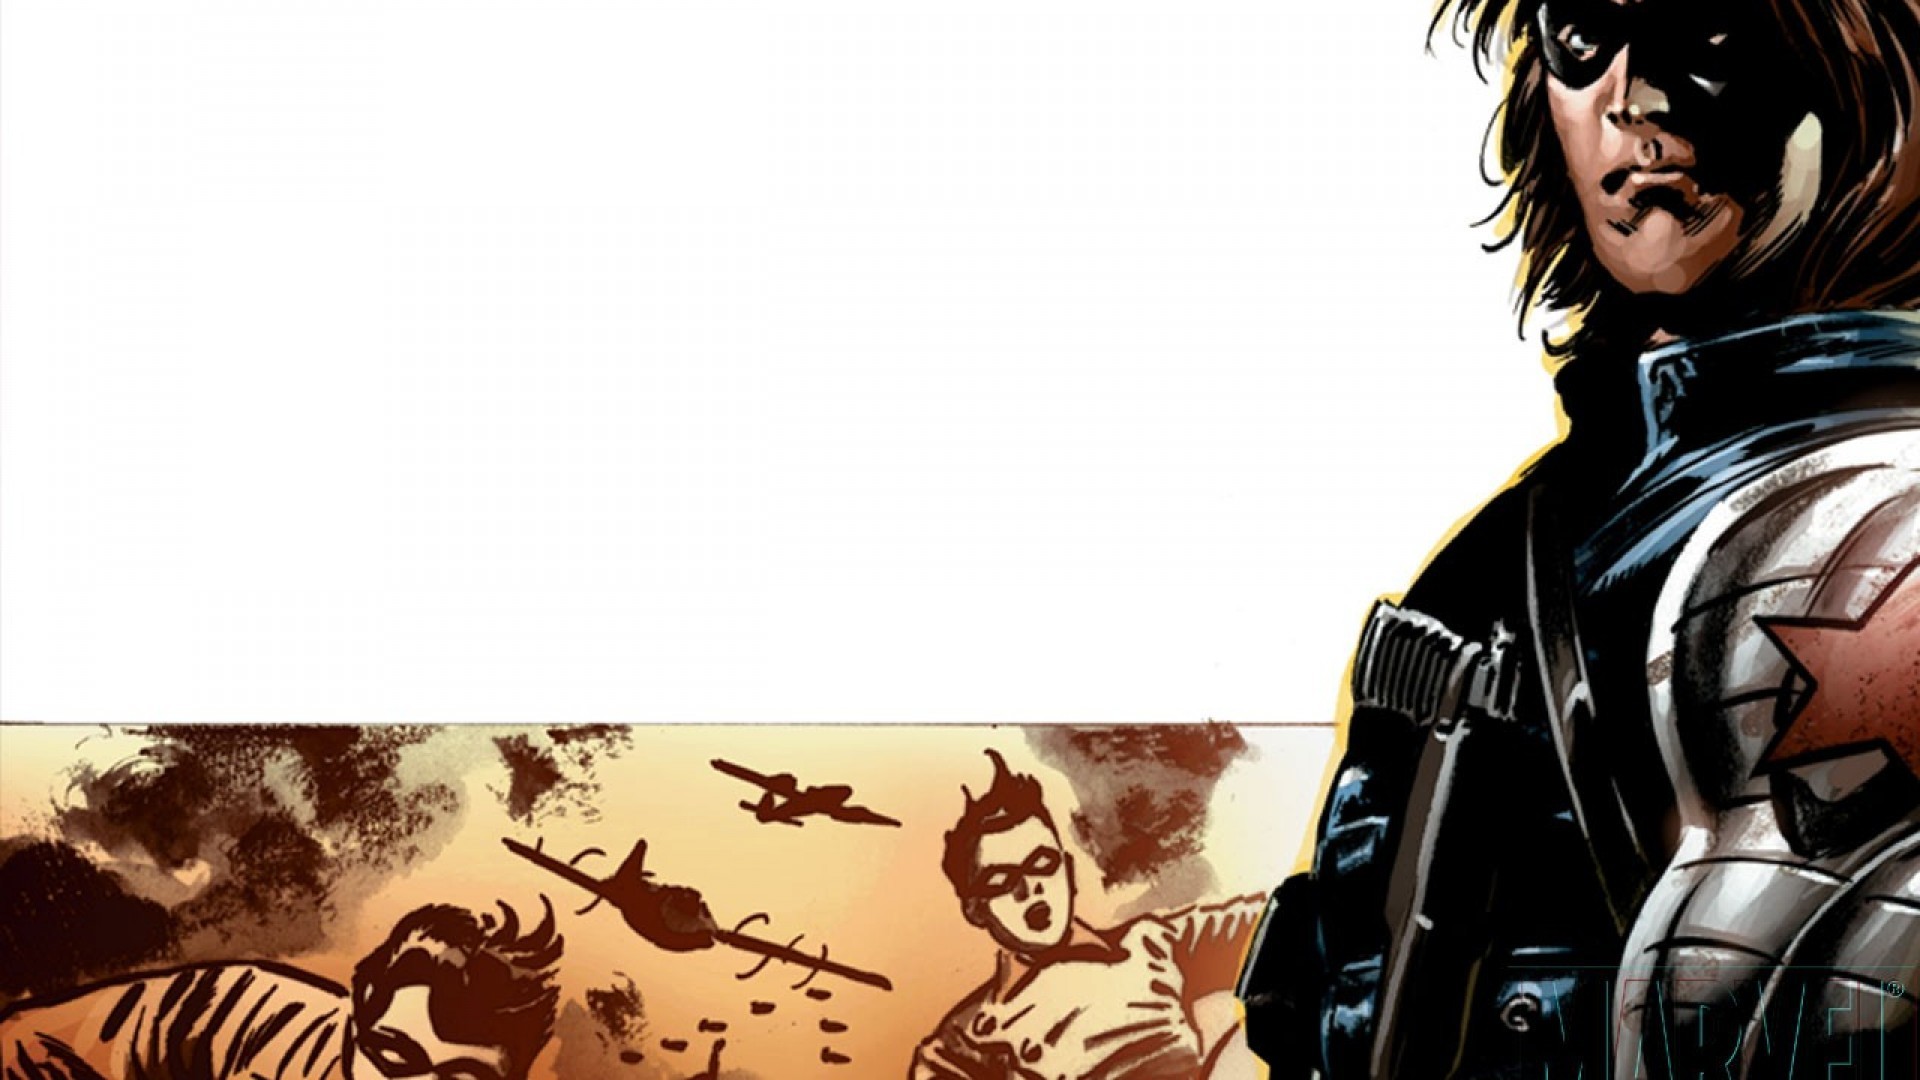 The Winter Soldier Hd Illustration - Winter Soldier Hd Background - HD Wallpaper 